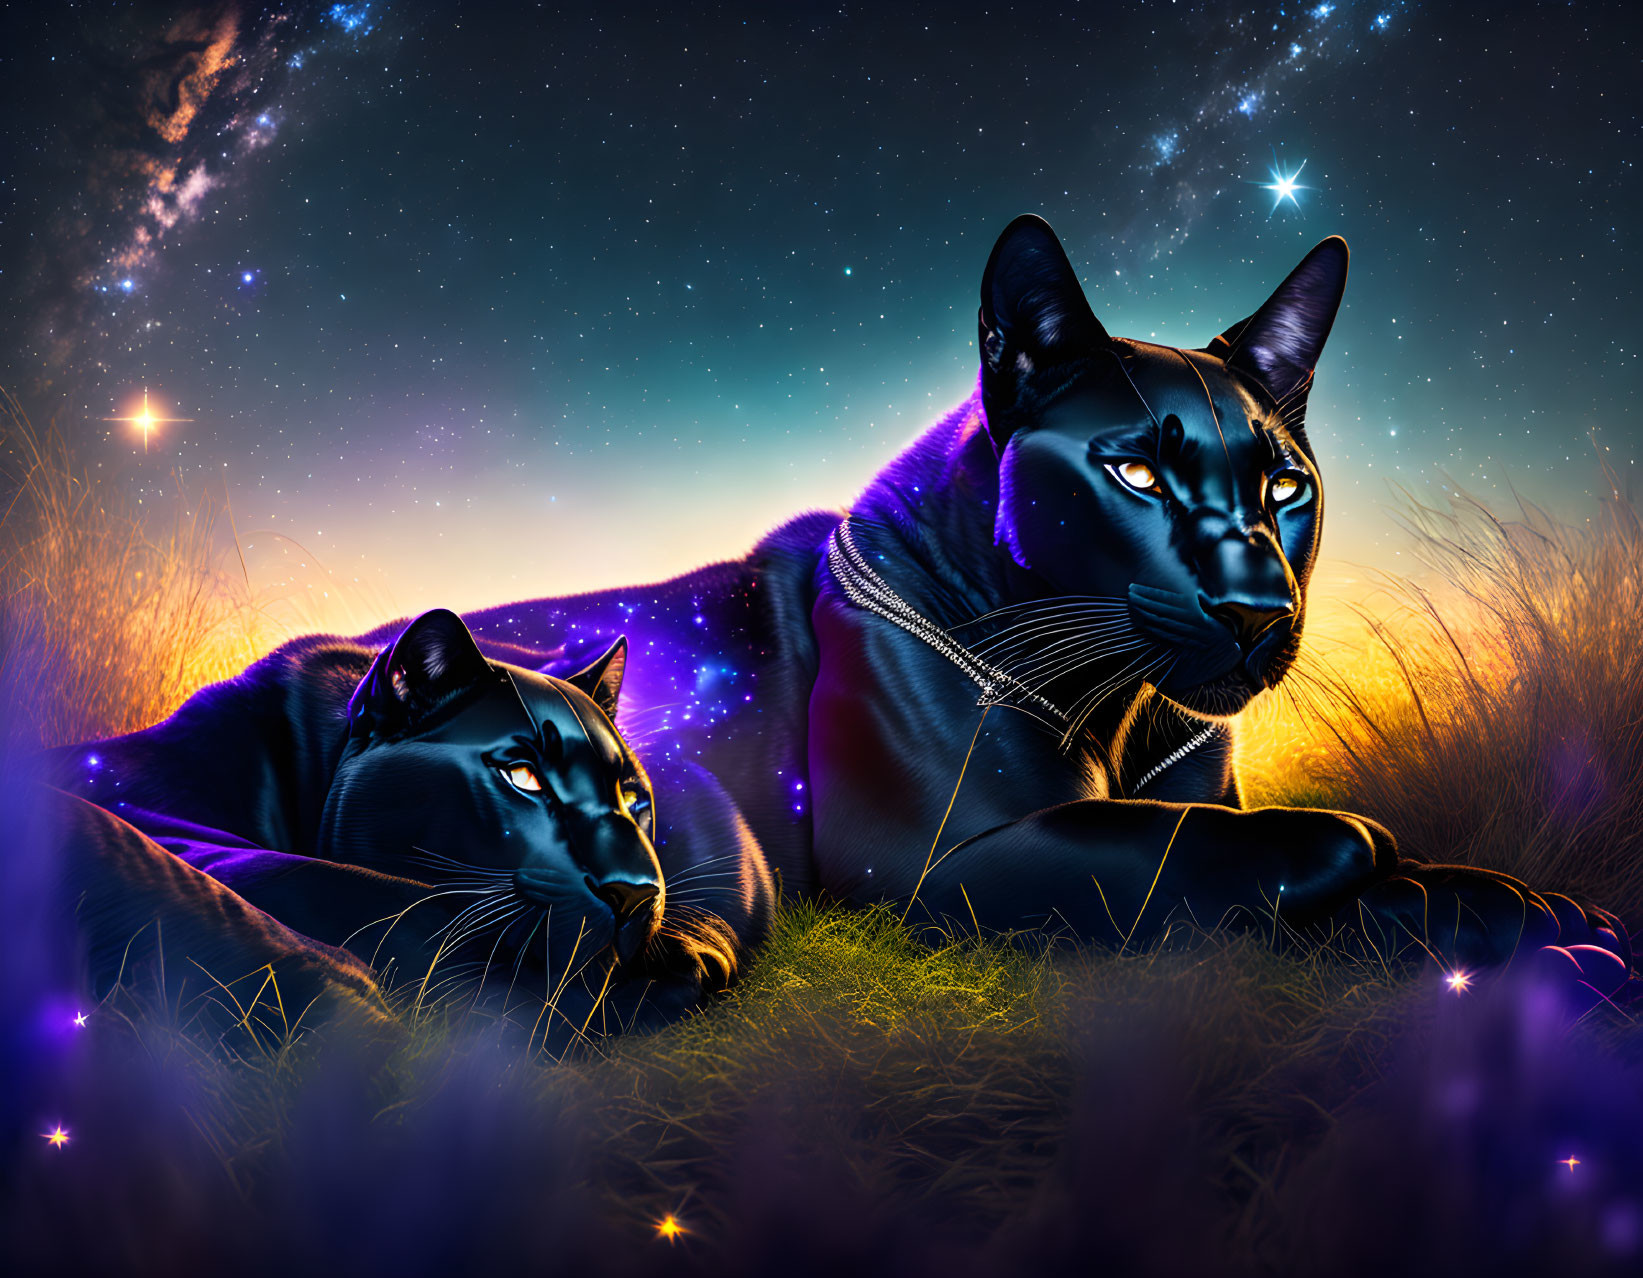 Ethereal black cats with glowing eyes in mystical night scene